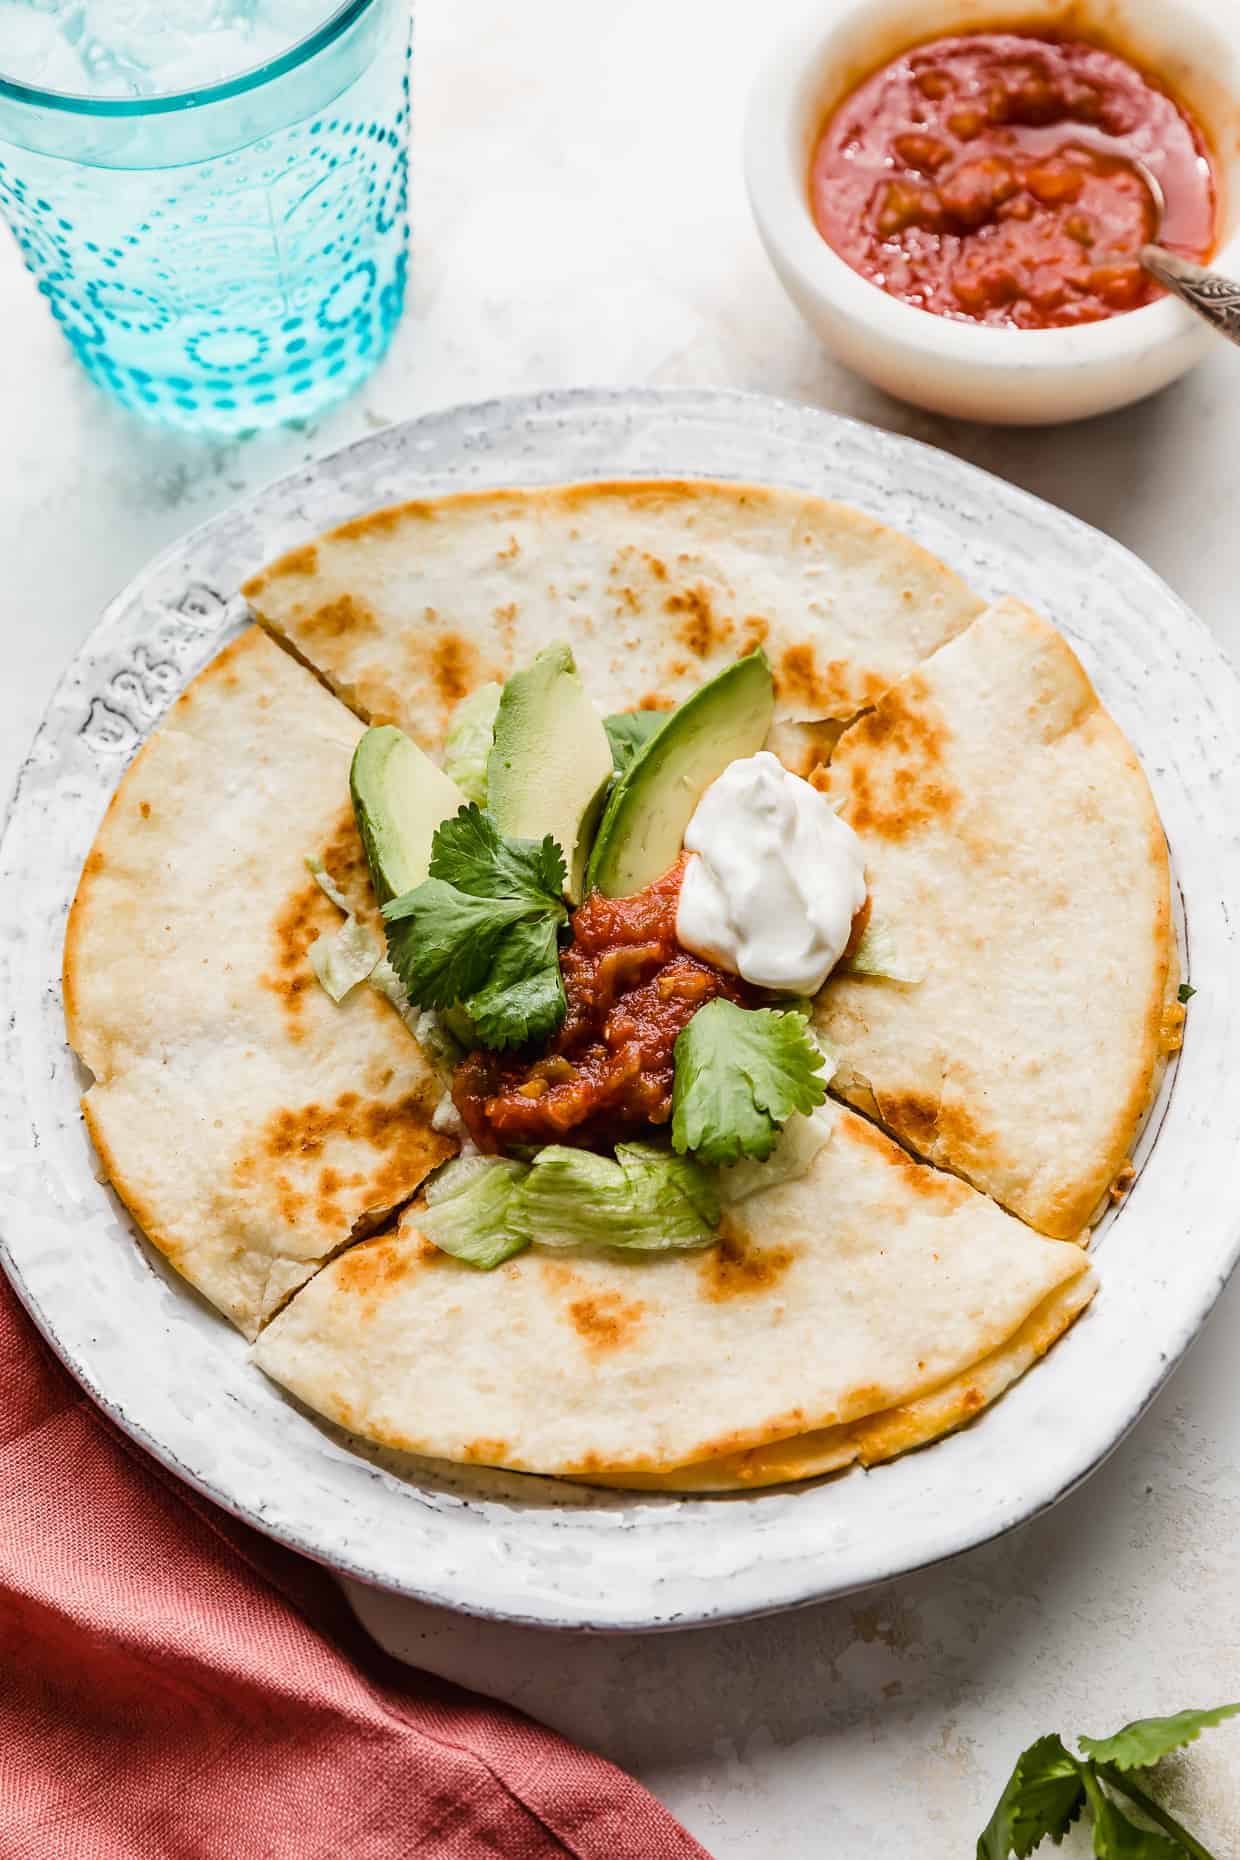 A cheese quesadilla on a white plate topped with avocado, salsa, sour cream, and shredded lettuce.